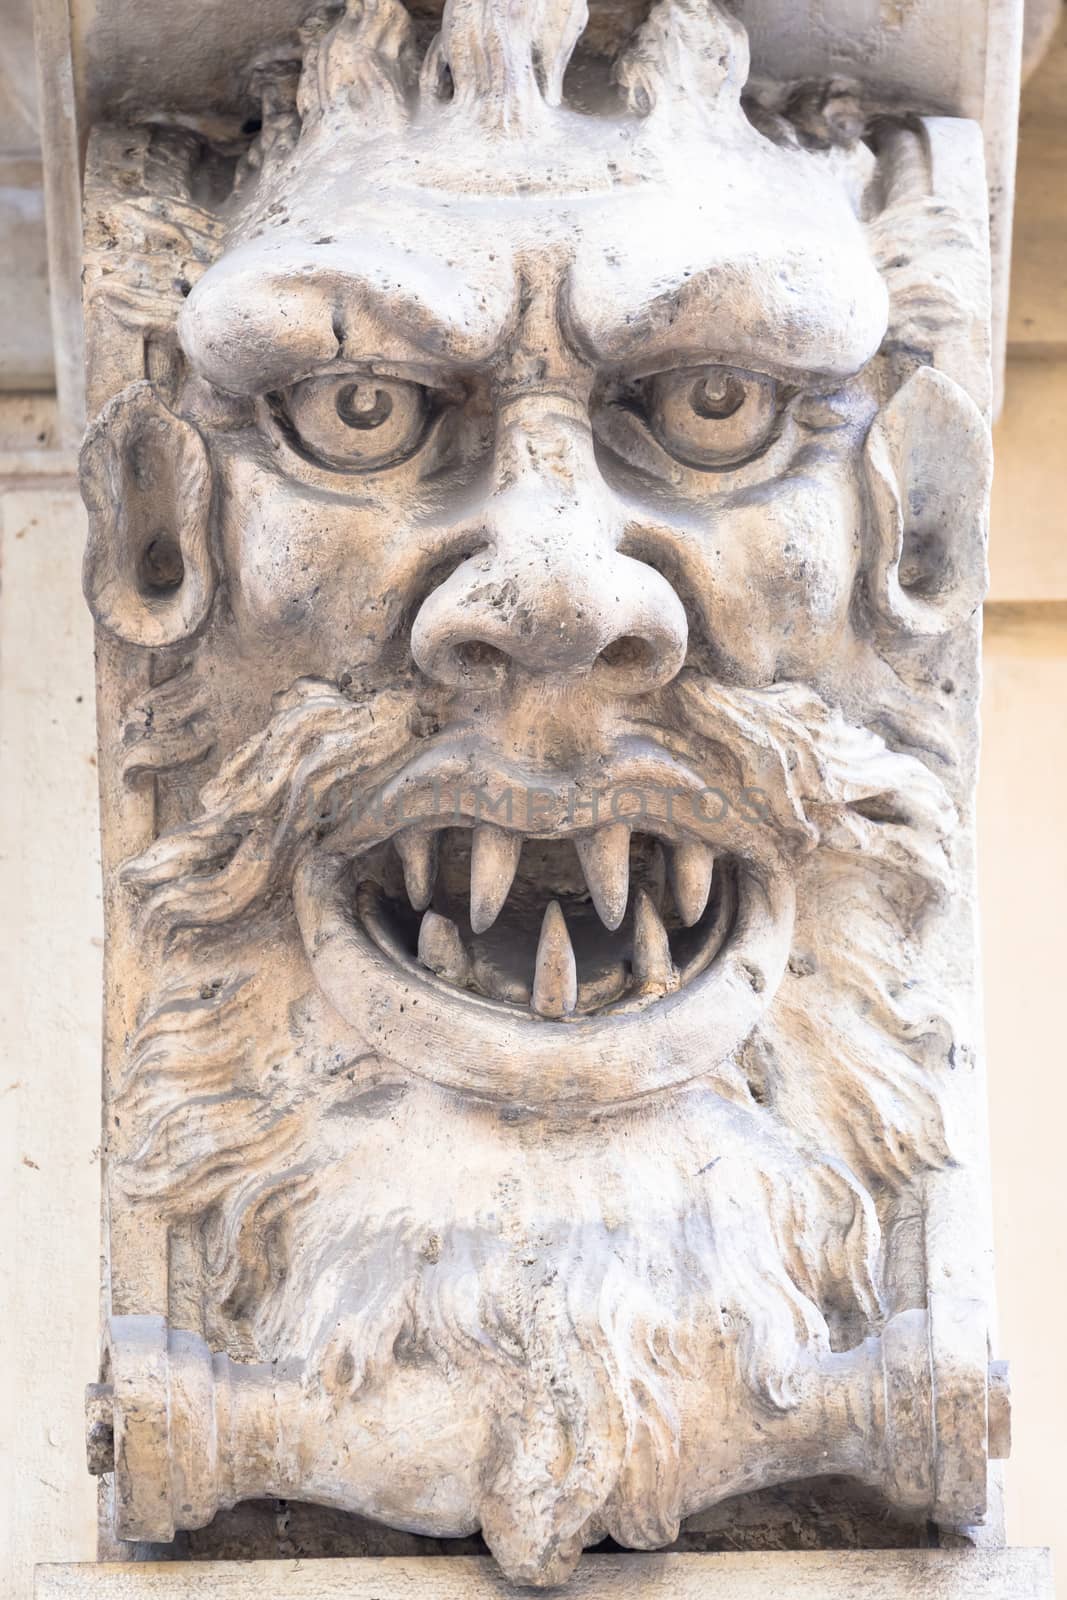 Italy, Turin. This city is famous to be a corner of two global magical triangles. This is a protective mask of stone on the top of a luxury palace entrance, dated around 1800